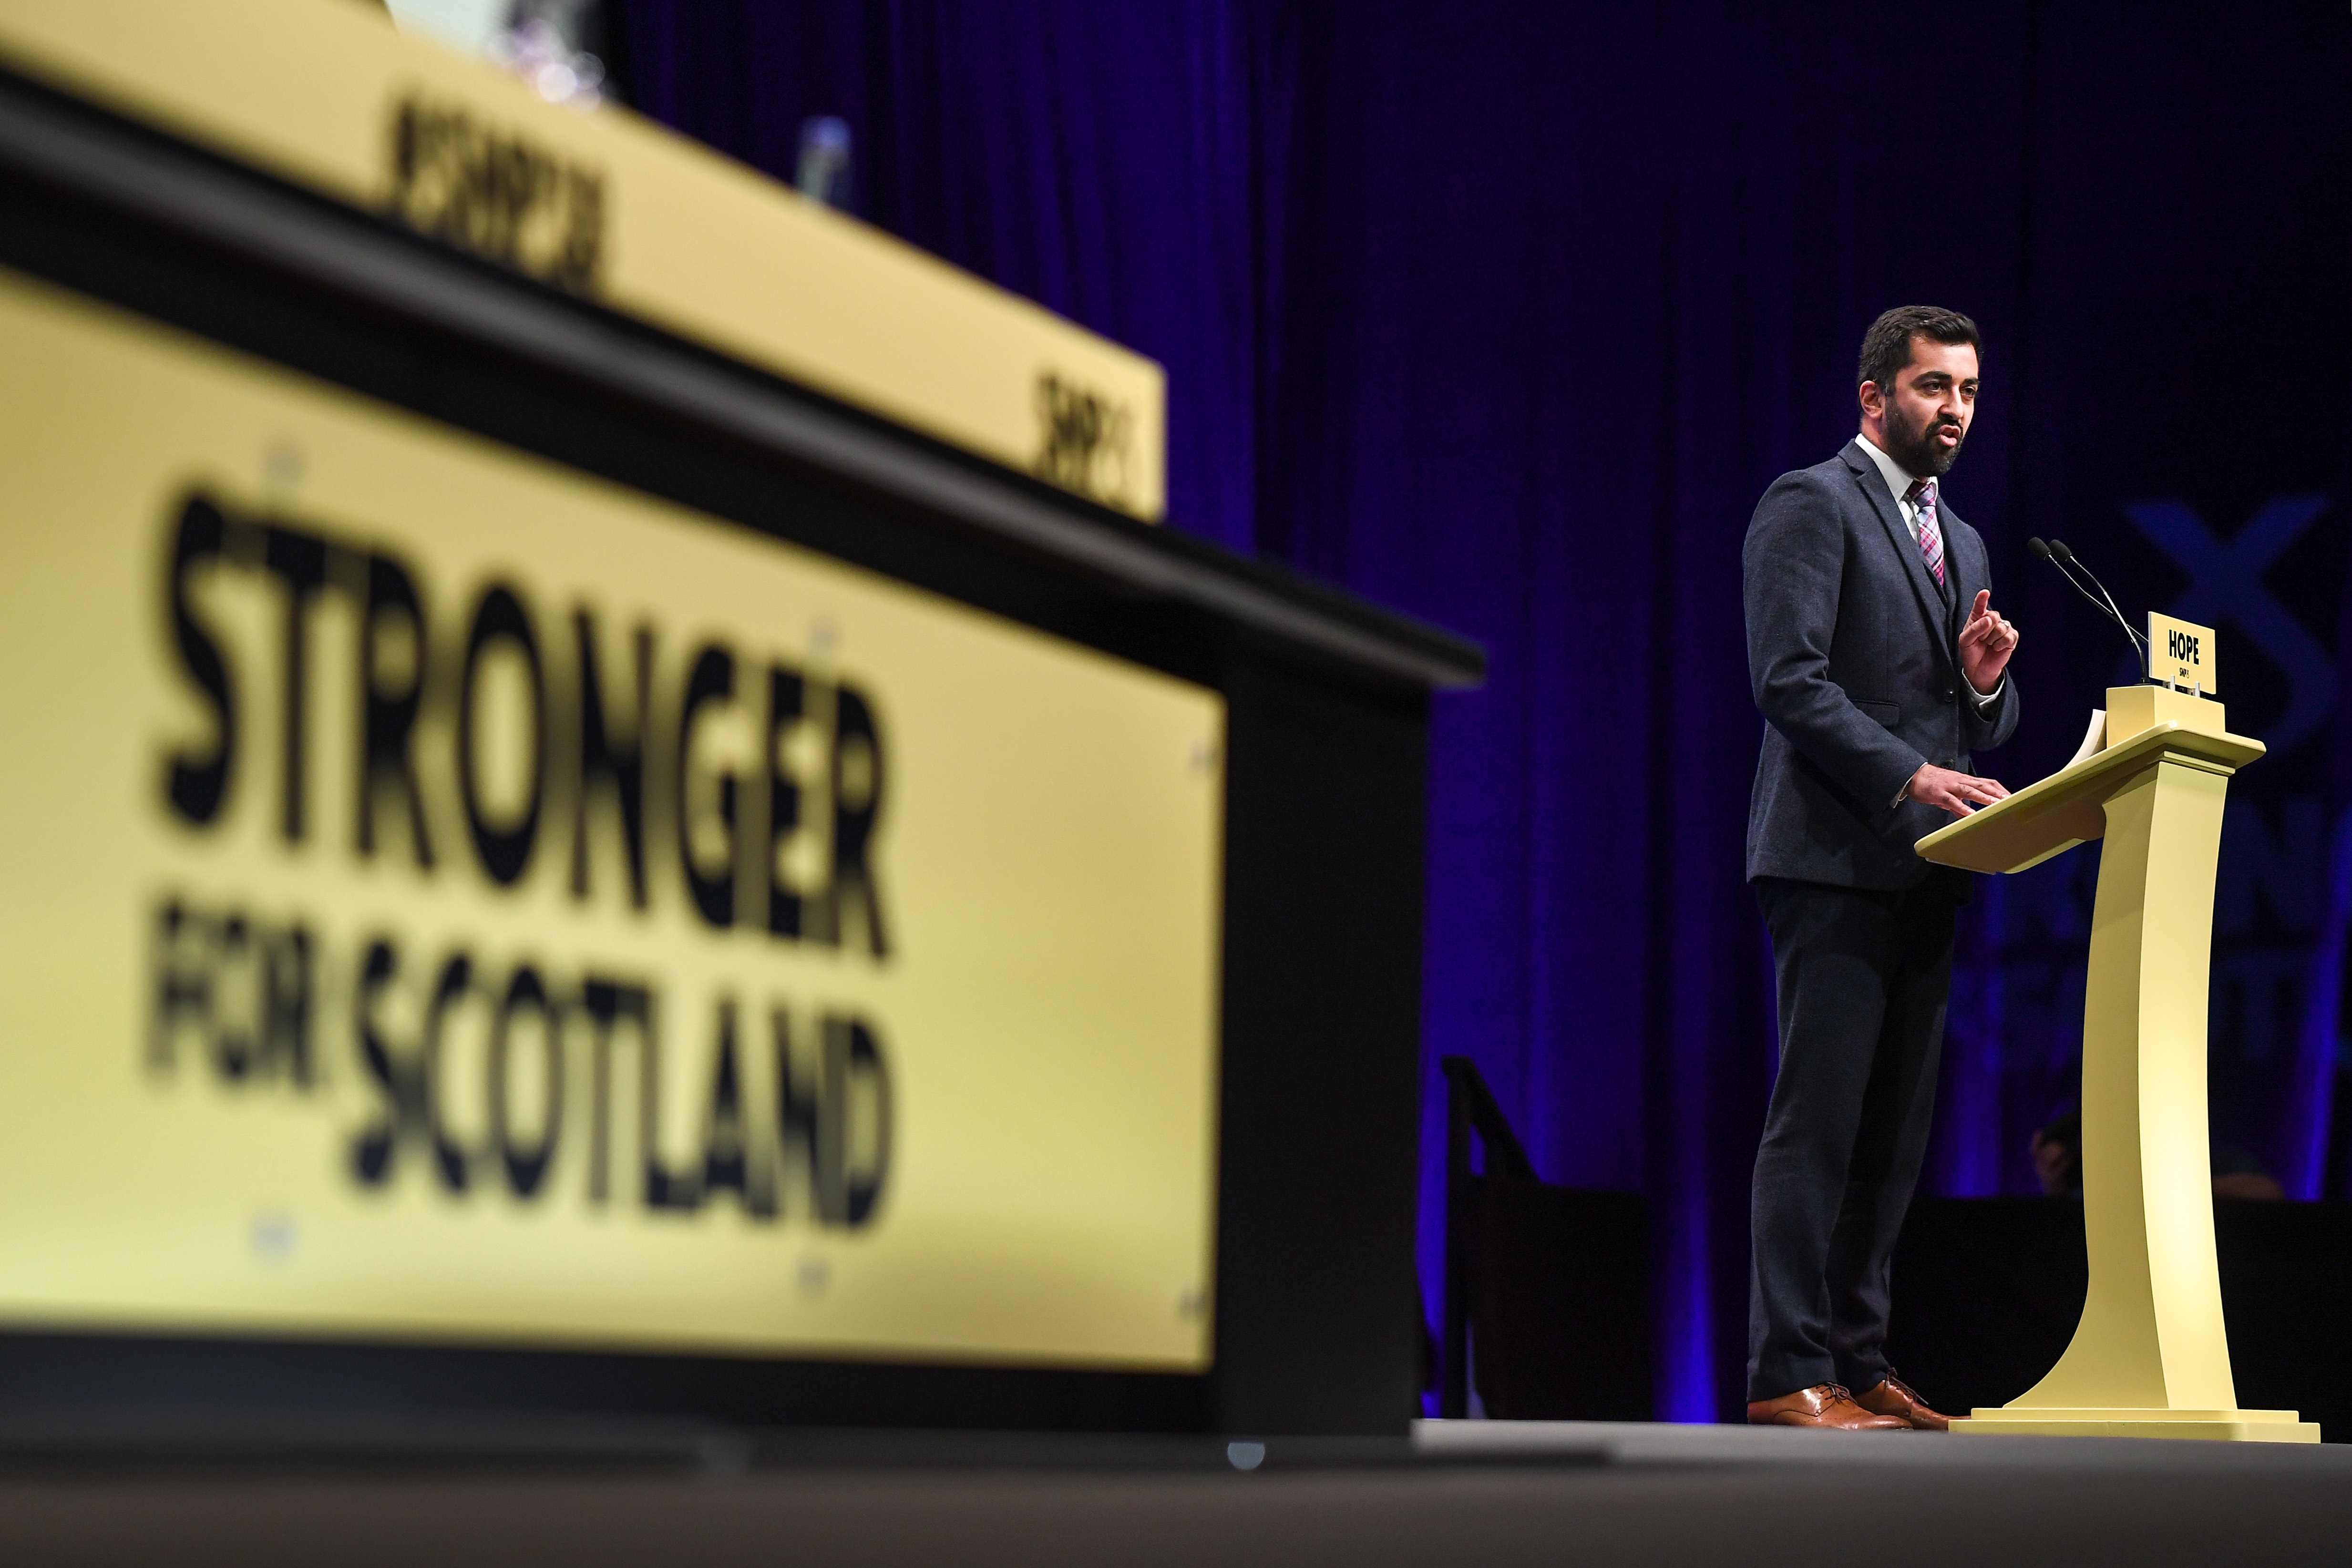 GLASGOW, SCOTLAND - OCTOBER 07: Humza Yousaf MSP, Cabinet Secretary for Justice, makes his keynote speech at the 84th annual SNP conference at the Scottish Exhibition and Conference Centre on October 7, 2018 in Glasgow, Scotland. Members will gather in Glasgow for the three day conference which will conclude on Tuesday with a keynote speech by the party leader. (Photo by Jeff J Mitchell/Getty Images)